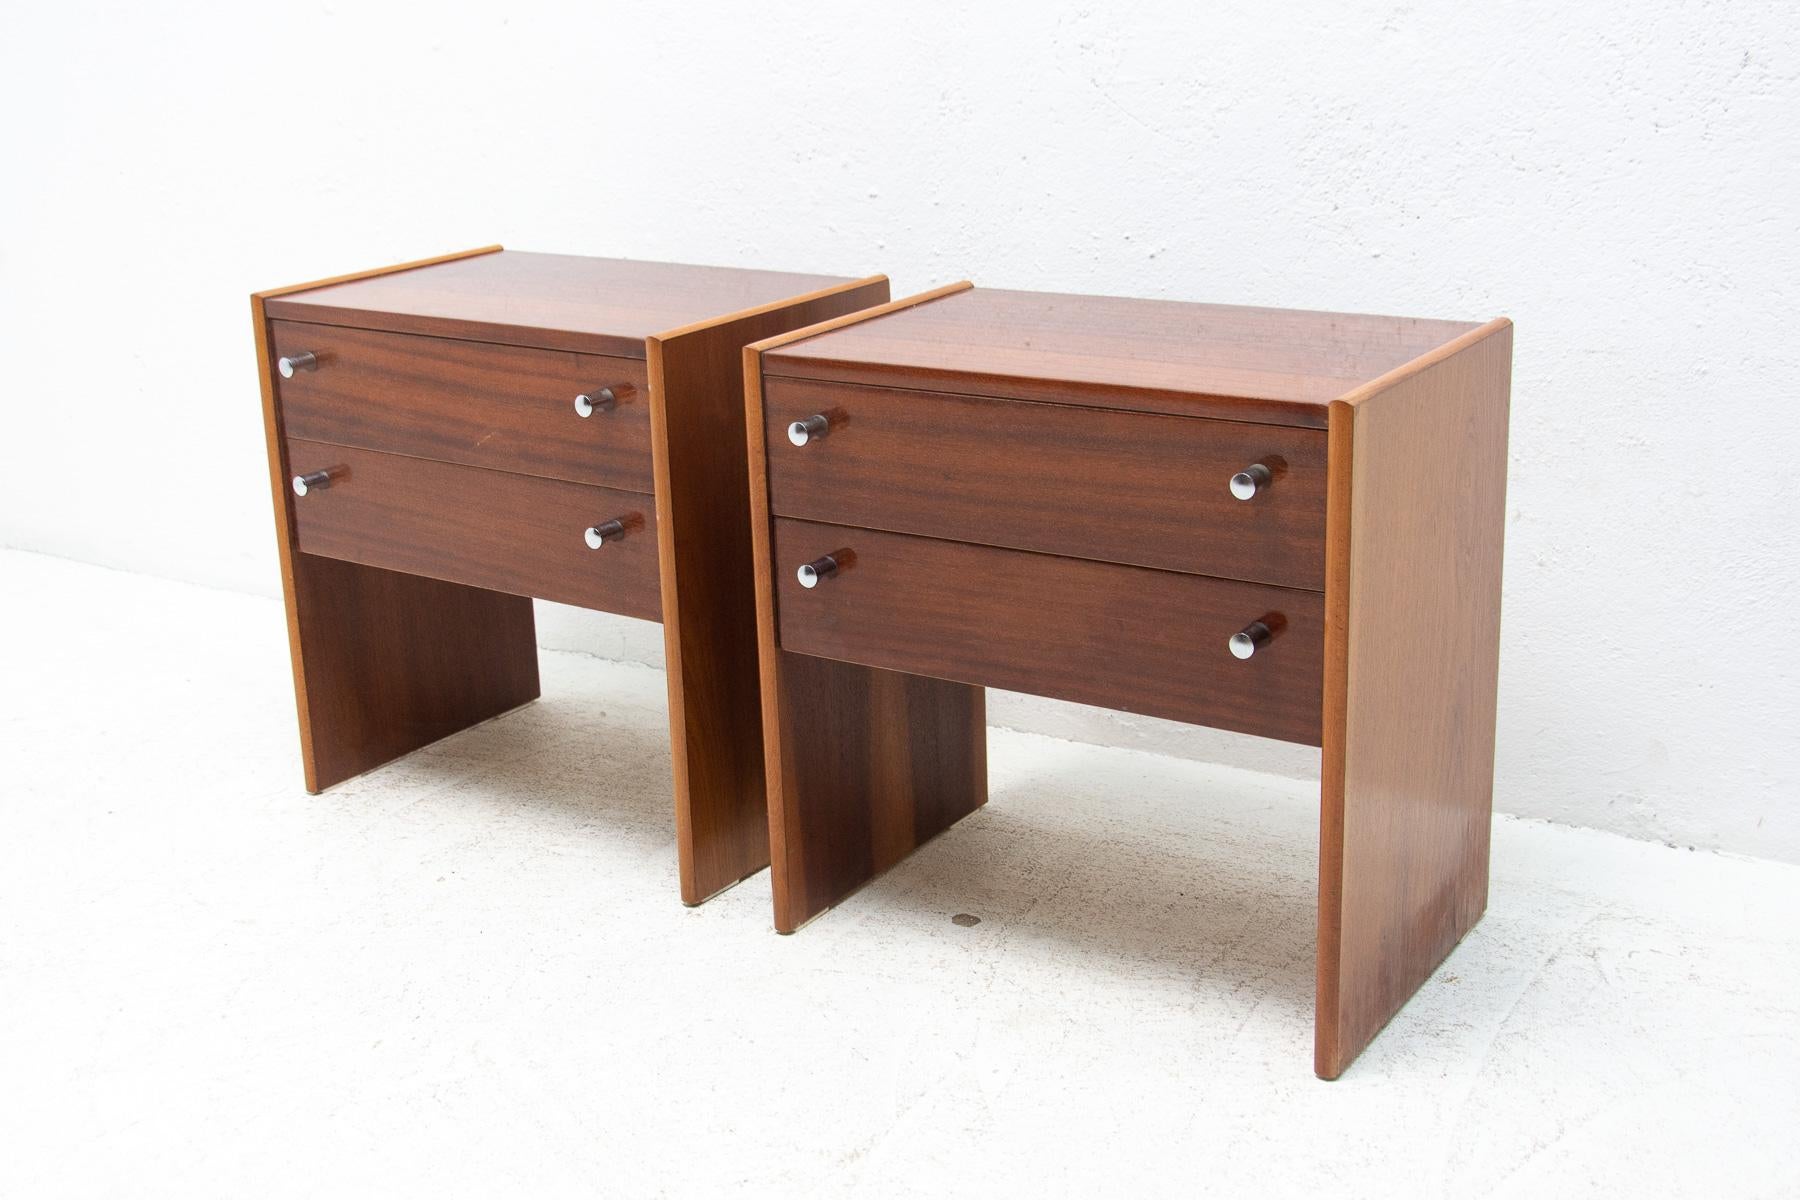 These Vintage bedside tables were made by UP Zavody company in the former Czechoslovakia in the 1980´s. Features a simple design, mahogany veneer. Overall in very good Vintage condition. Price is for the pair.

Measures: Height: 50 cm

width: 50